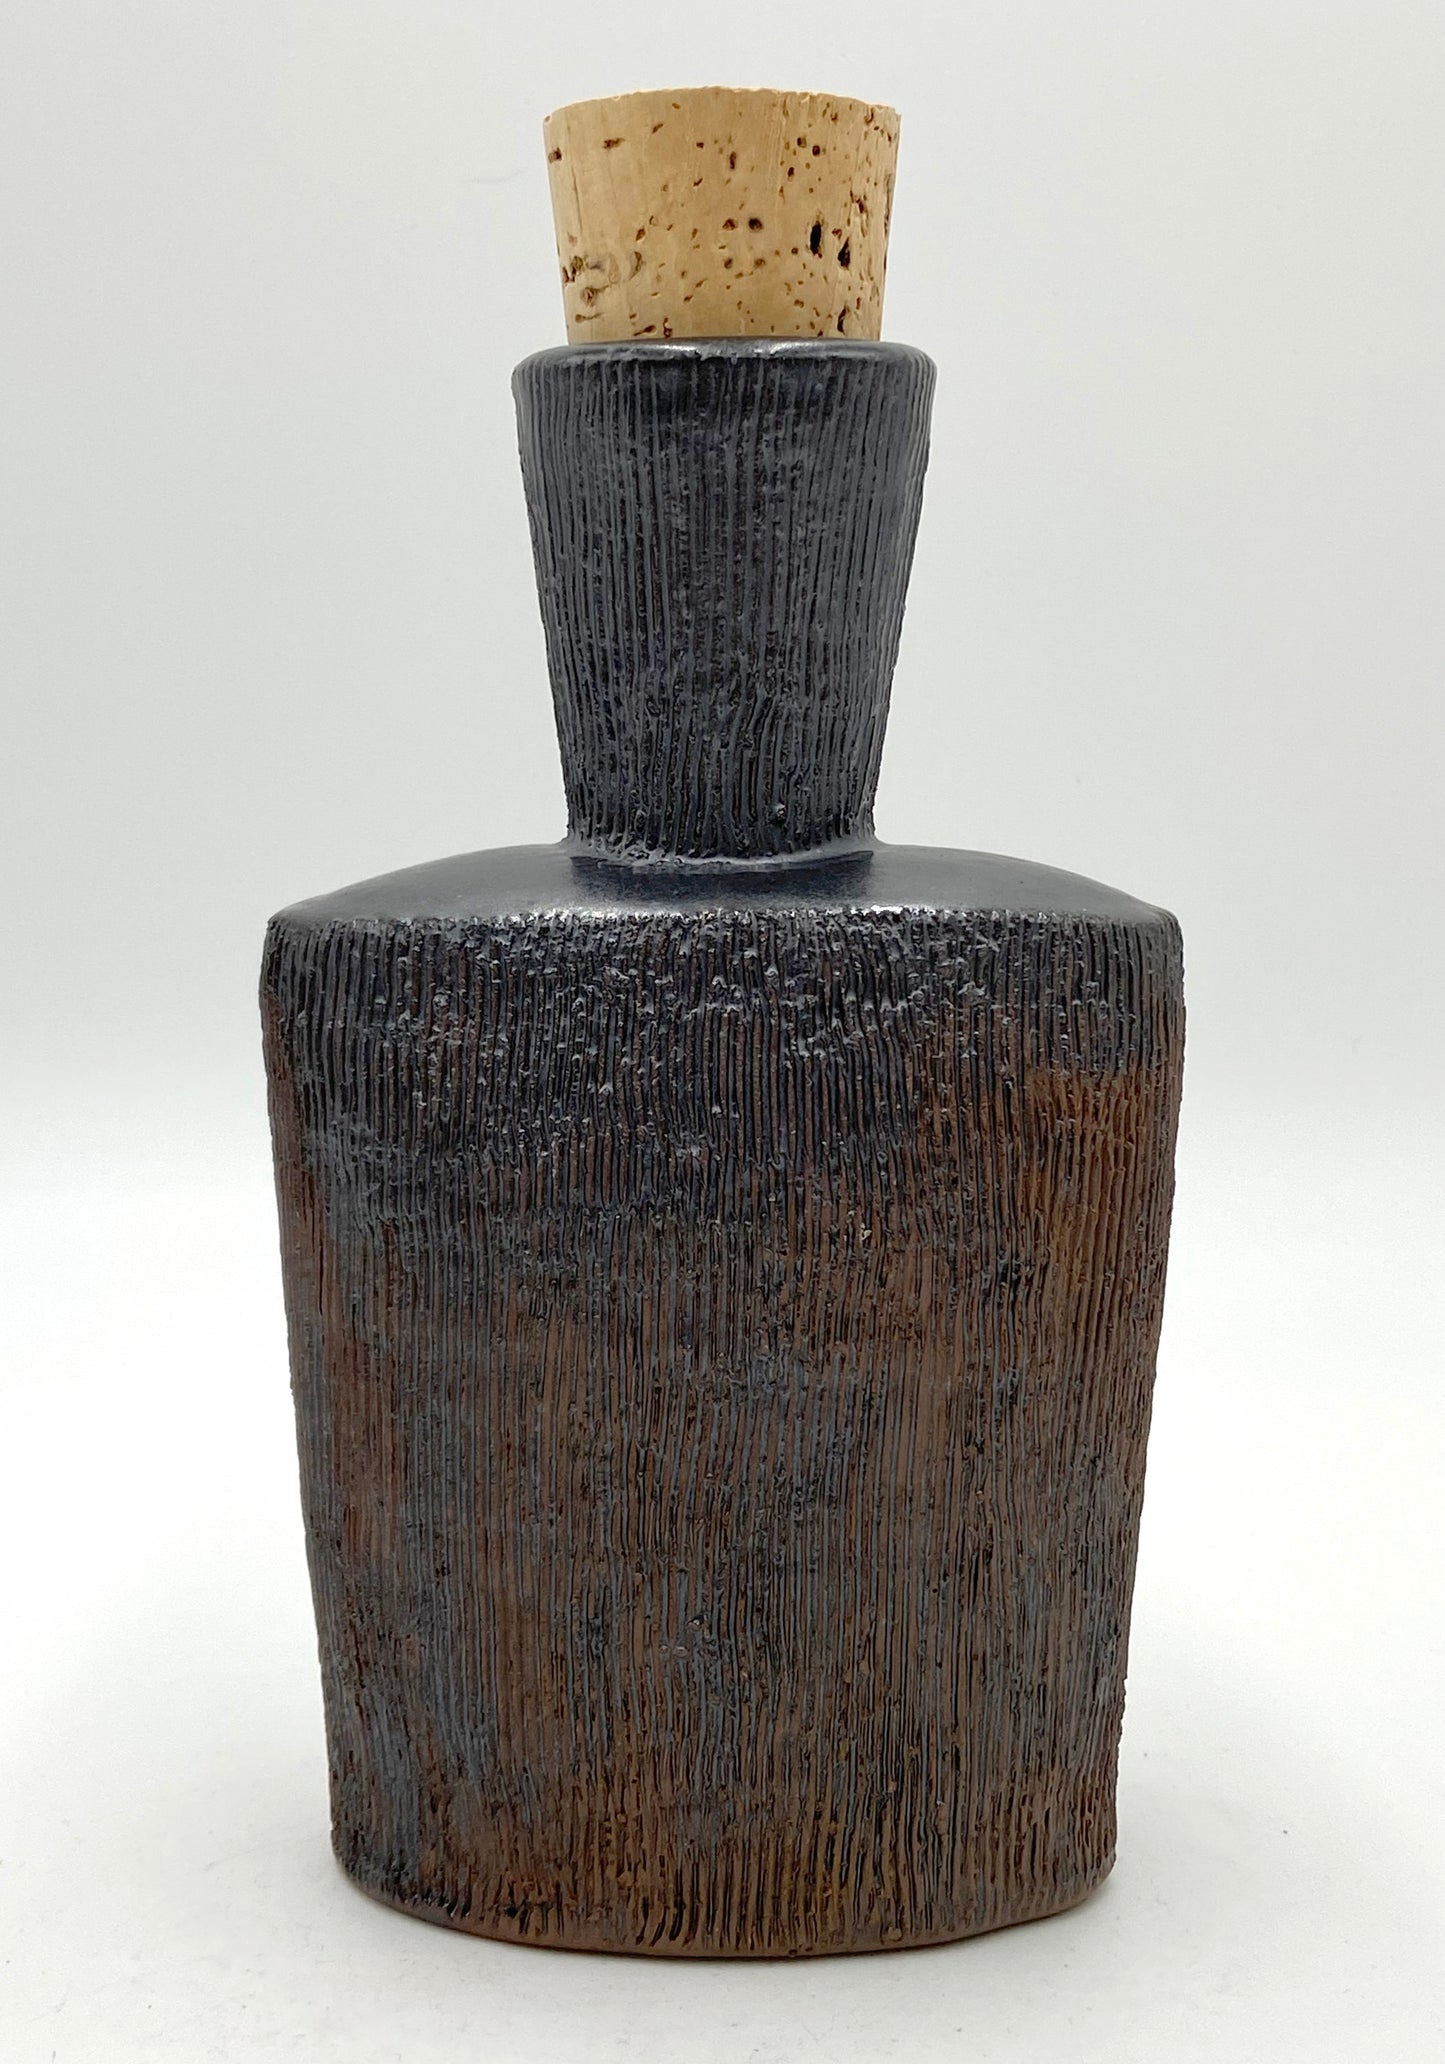 Wood-fired Whiskey Flask #8